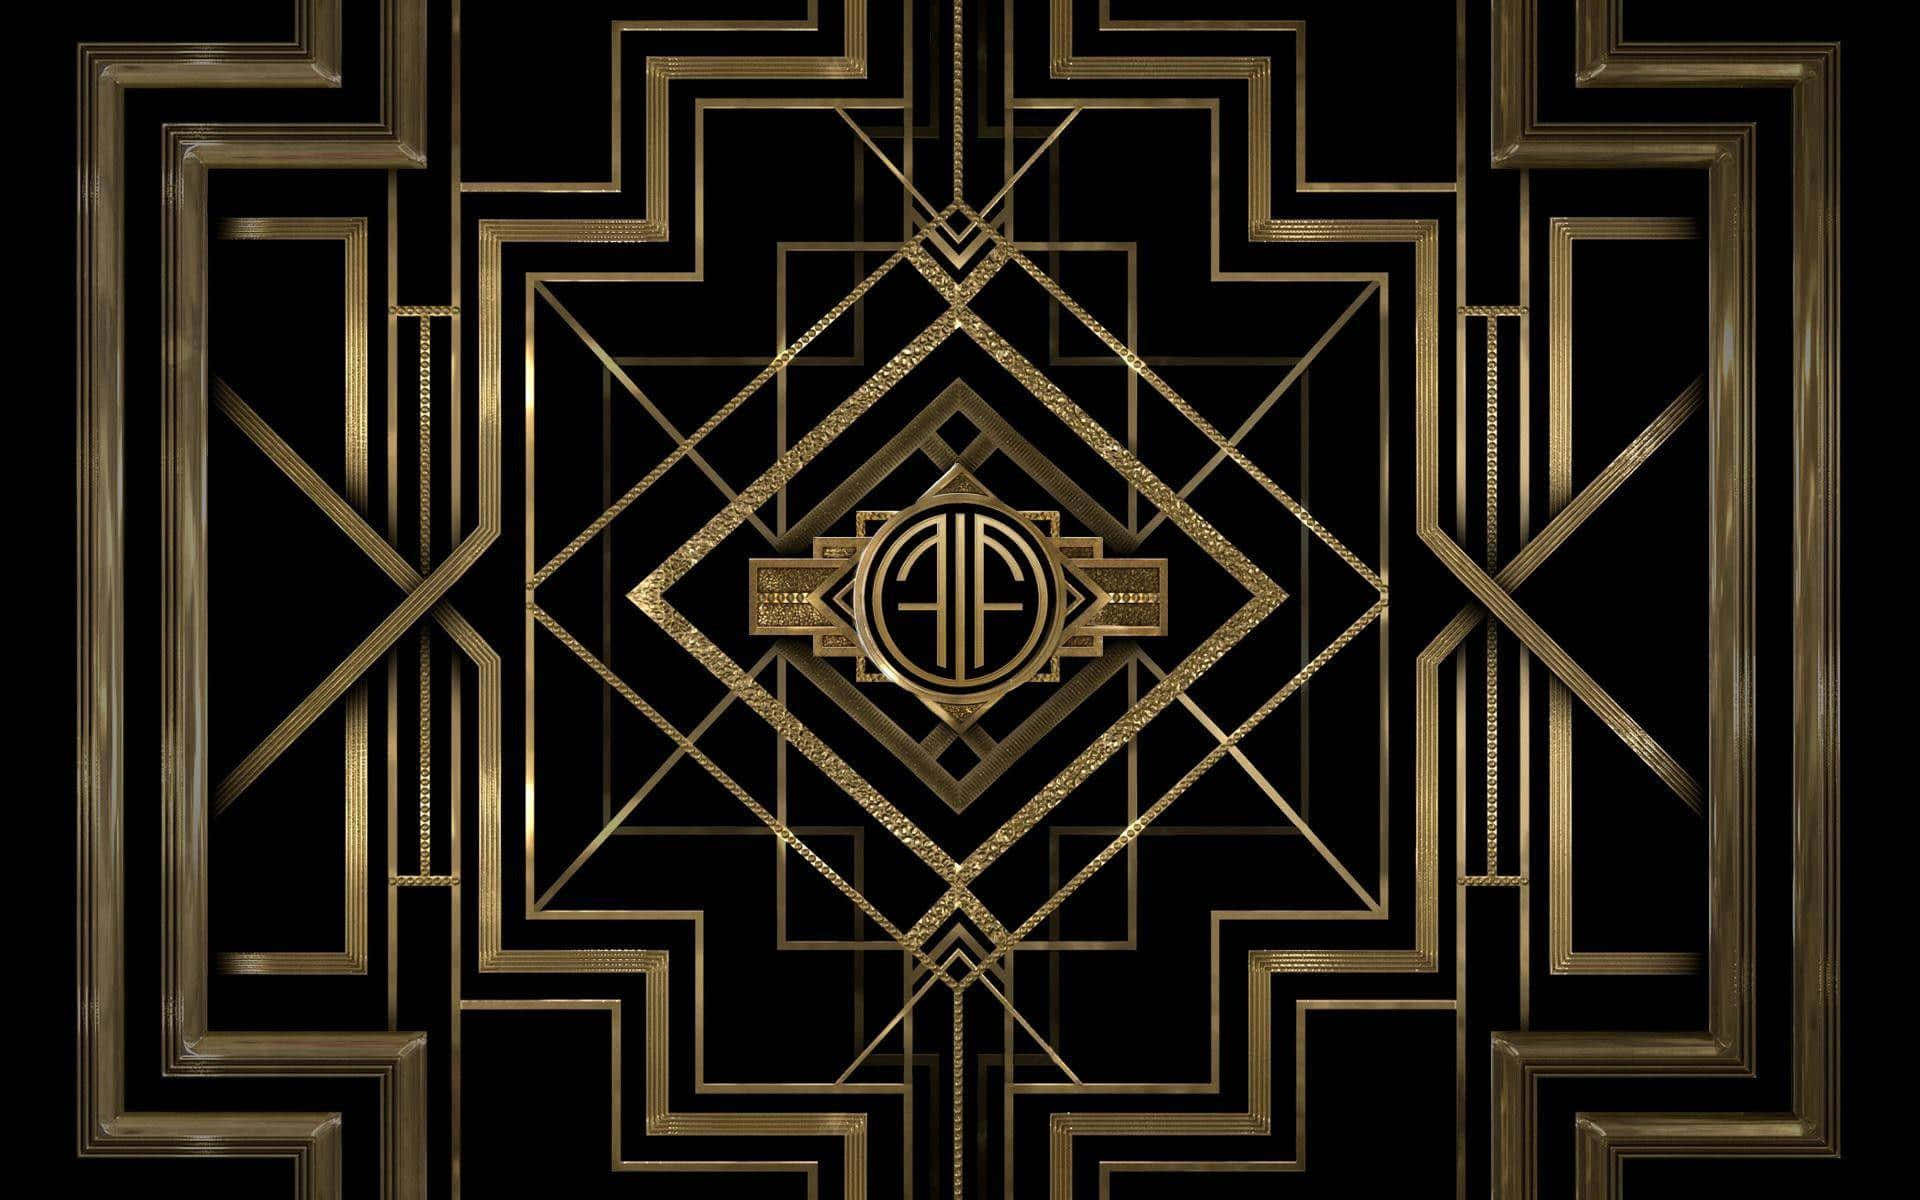 "Stay classy with Art Deco this season!" Wallpaper